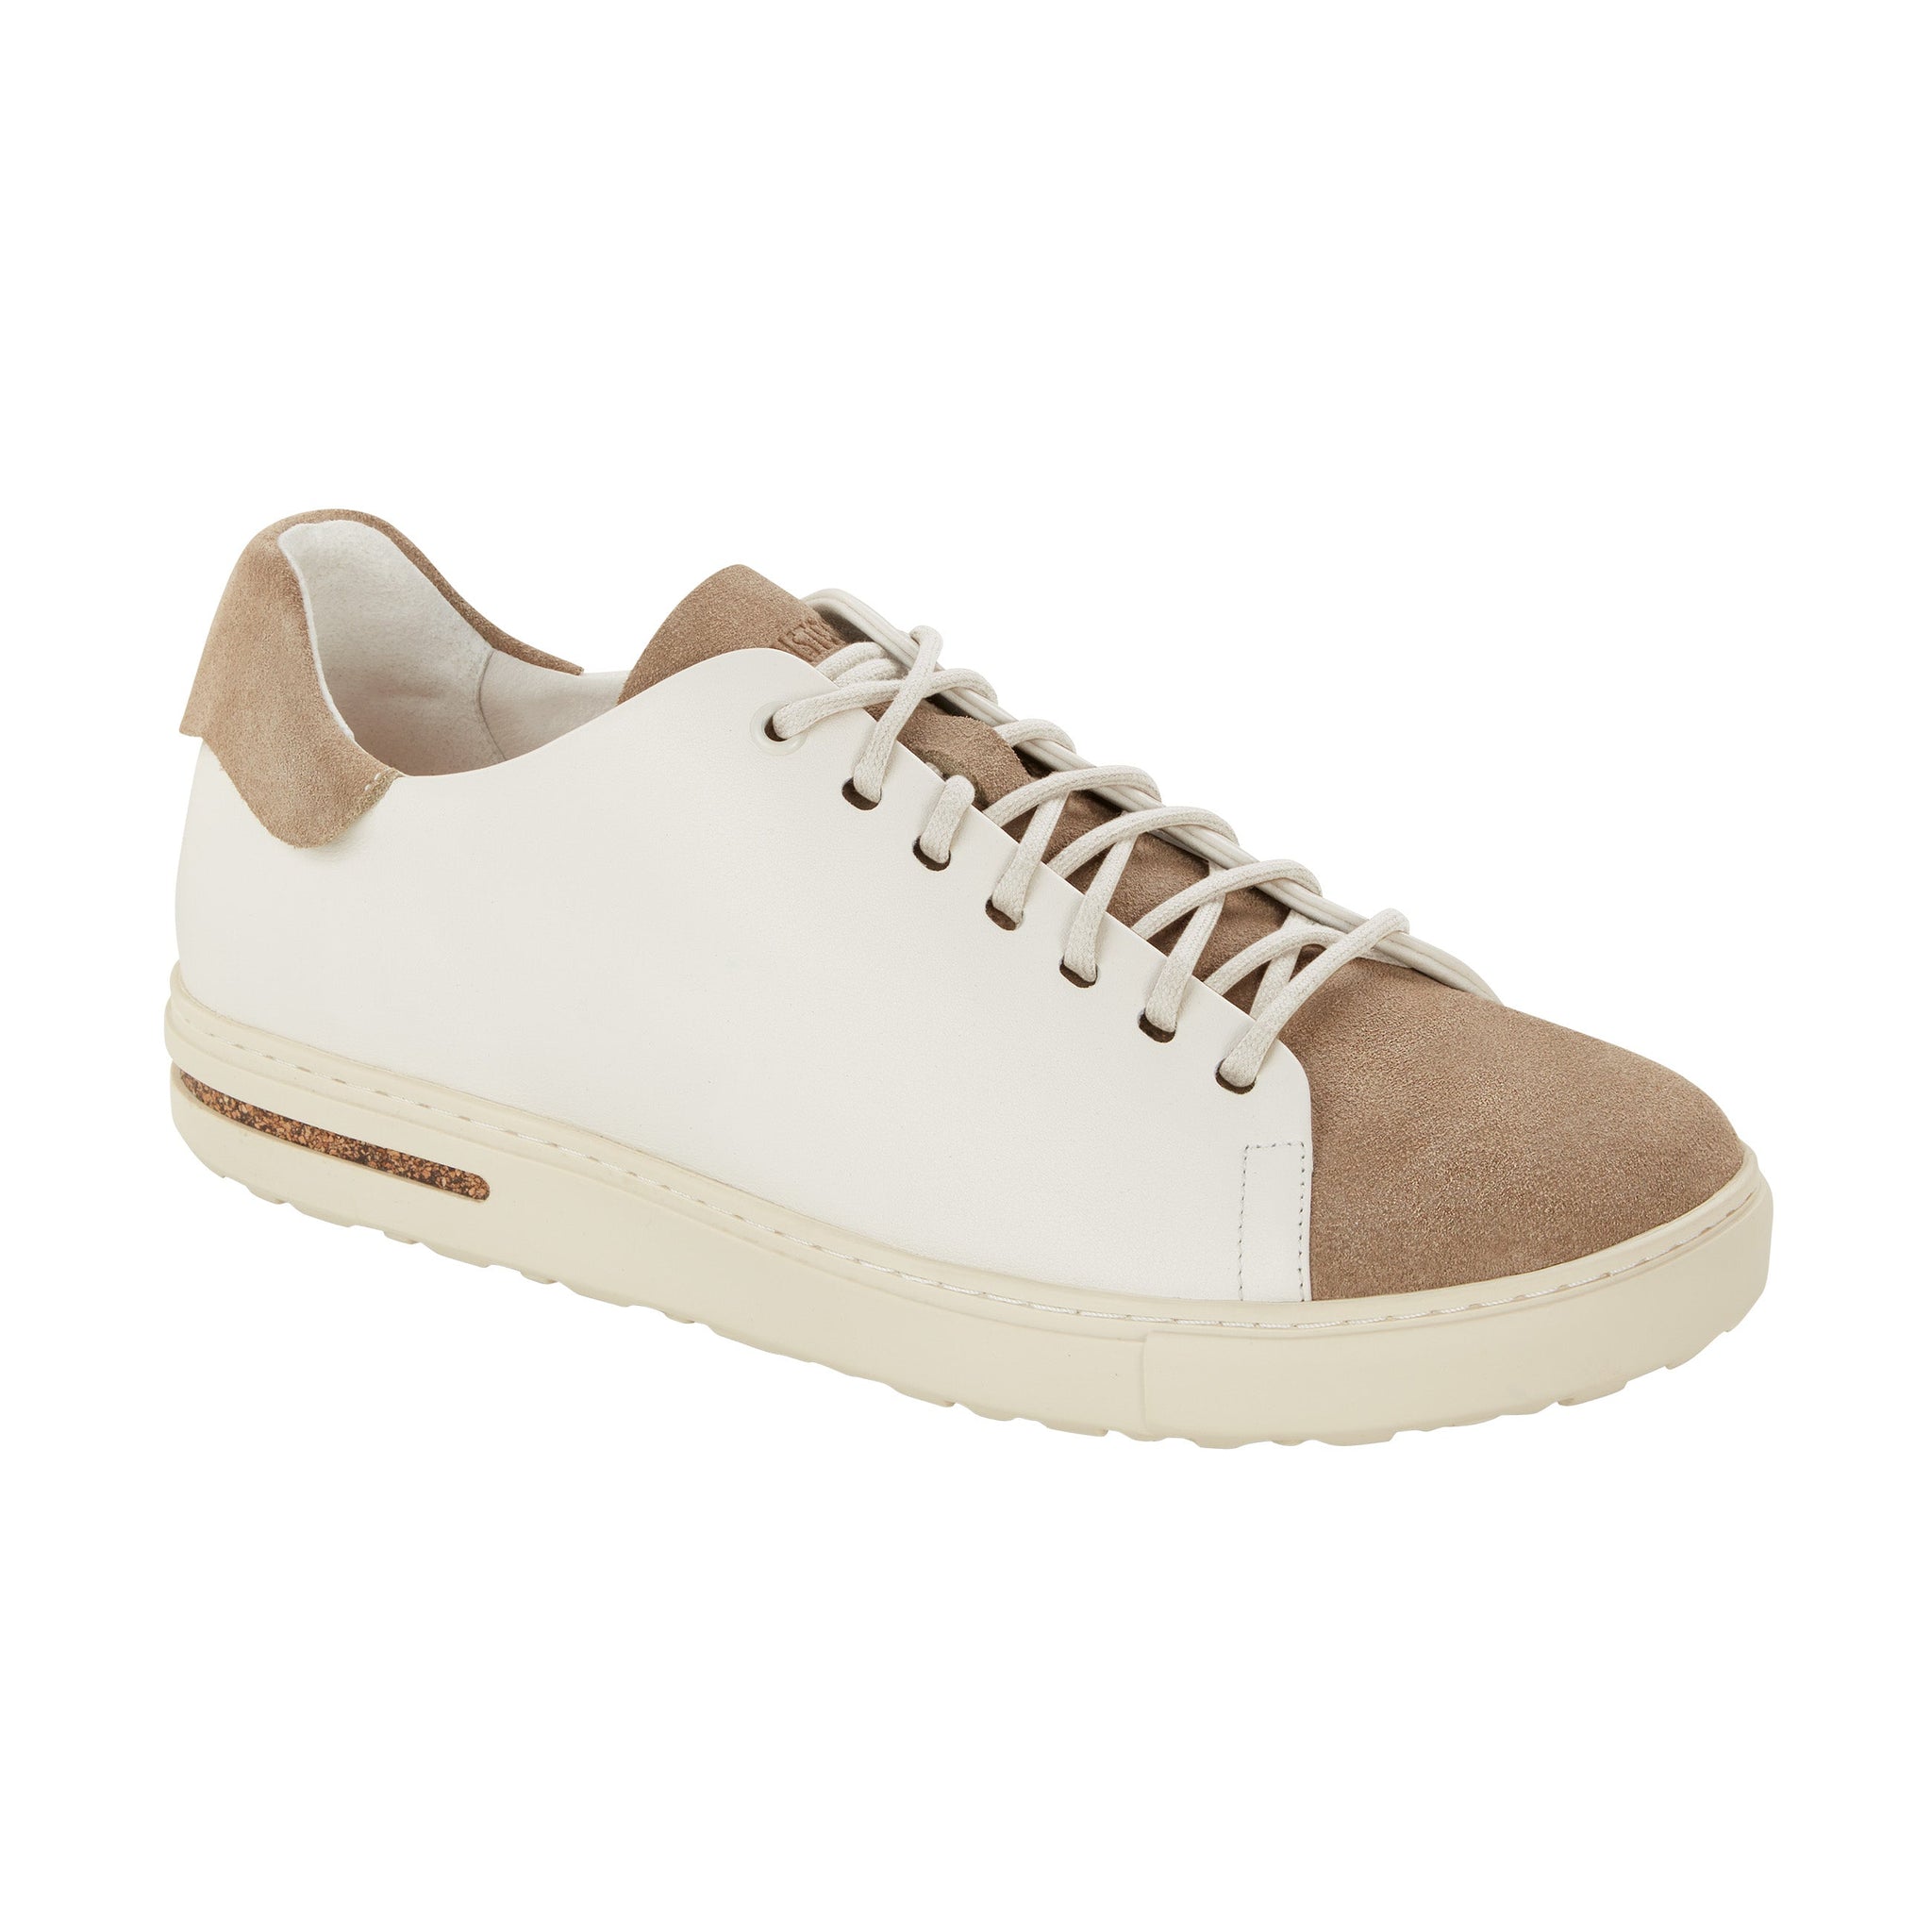 Bend Low Nubuck/Natural Leather in Grey Taupe/Eggshell Natural